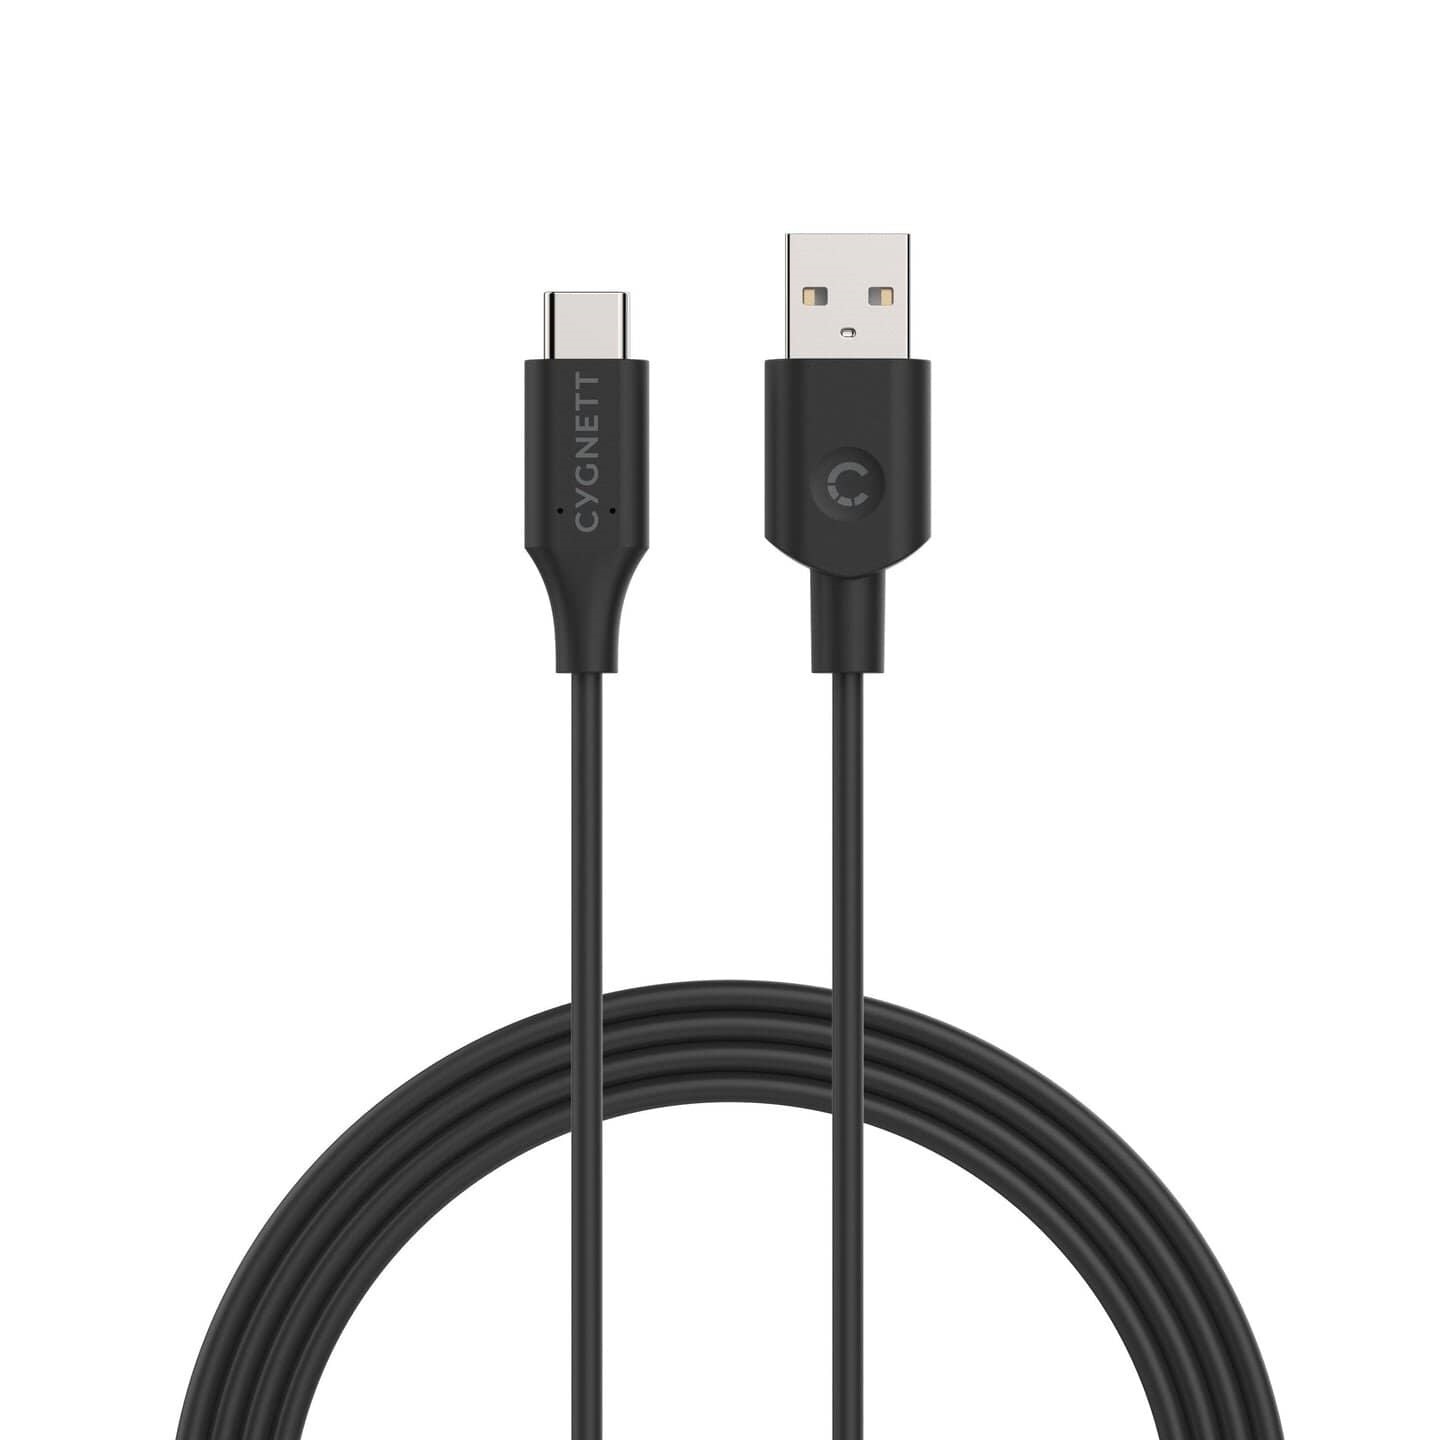 Cygnett Essentials USB-C to USB-A (2.0) Cable (1M) - Black (CY2728PCUSA), 3A/60W, 480Mbps Transfer Speed, Fast Charge & Sync Your Device, 2 Yr. WTY.